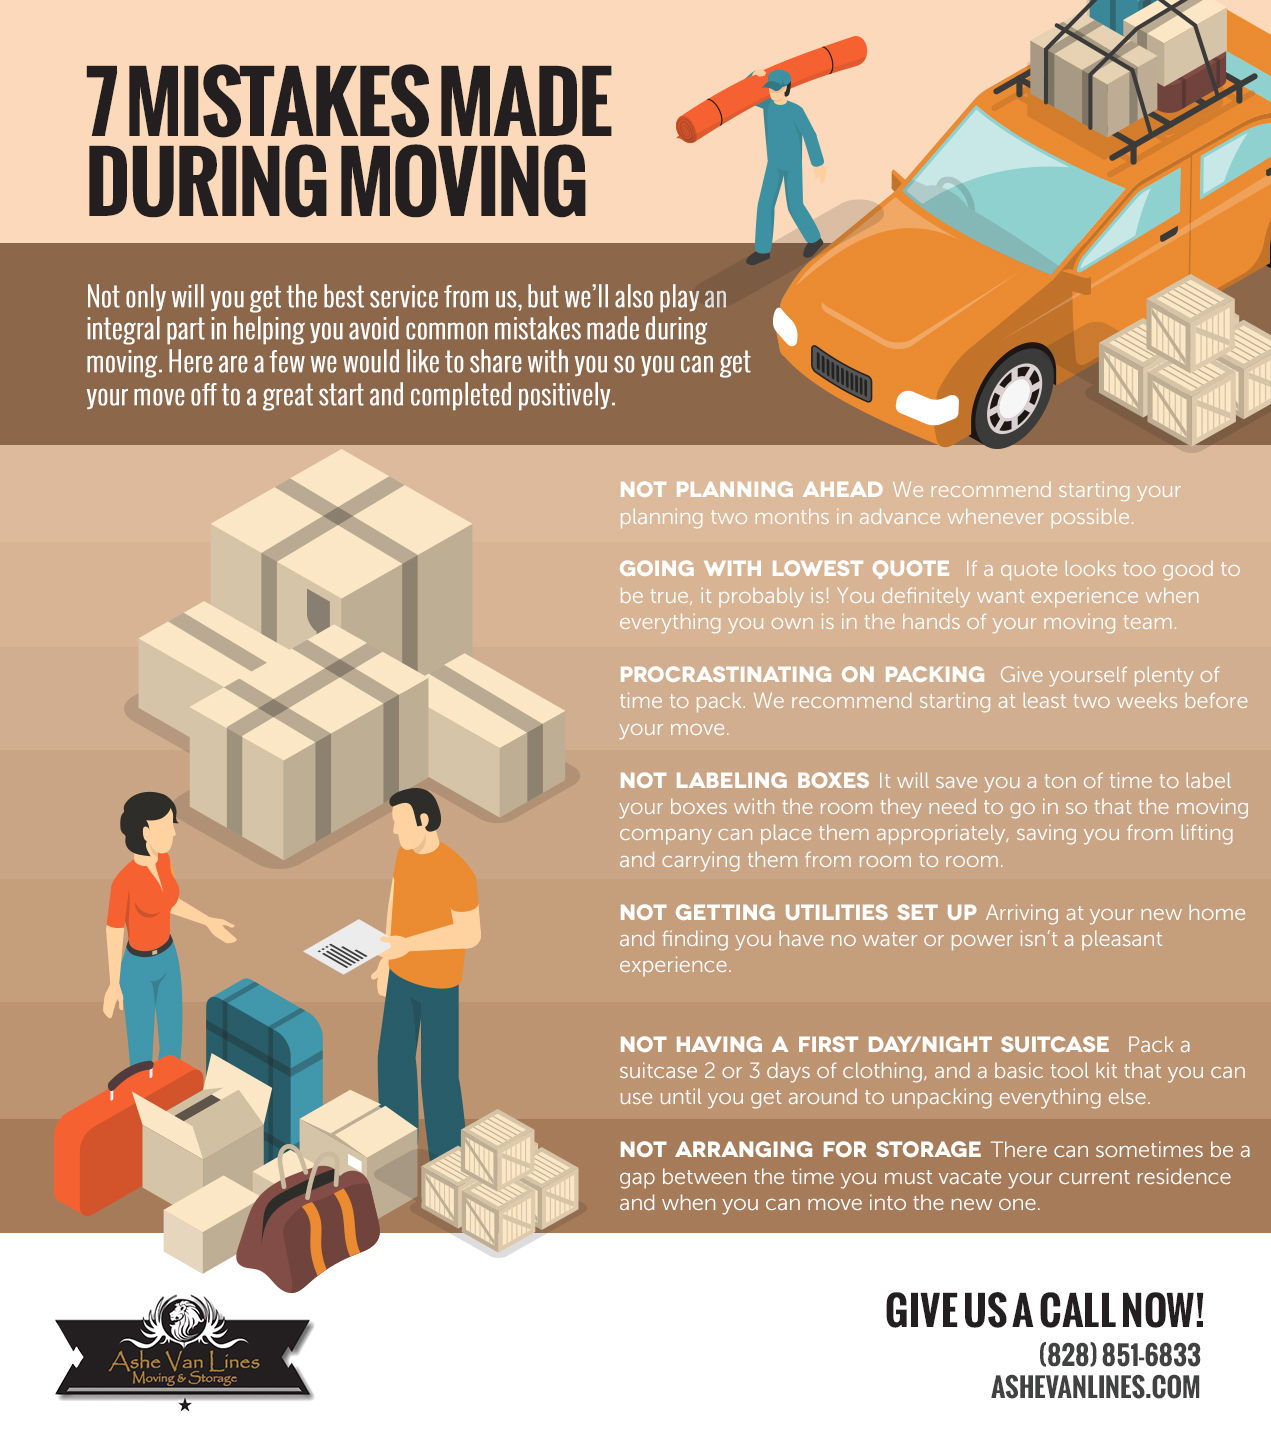 7 mistakes made during moving